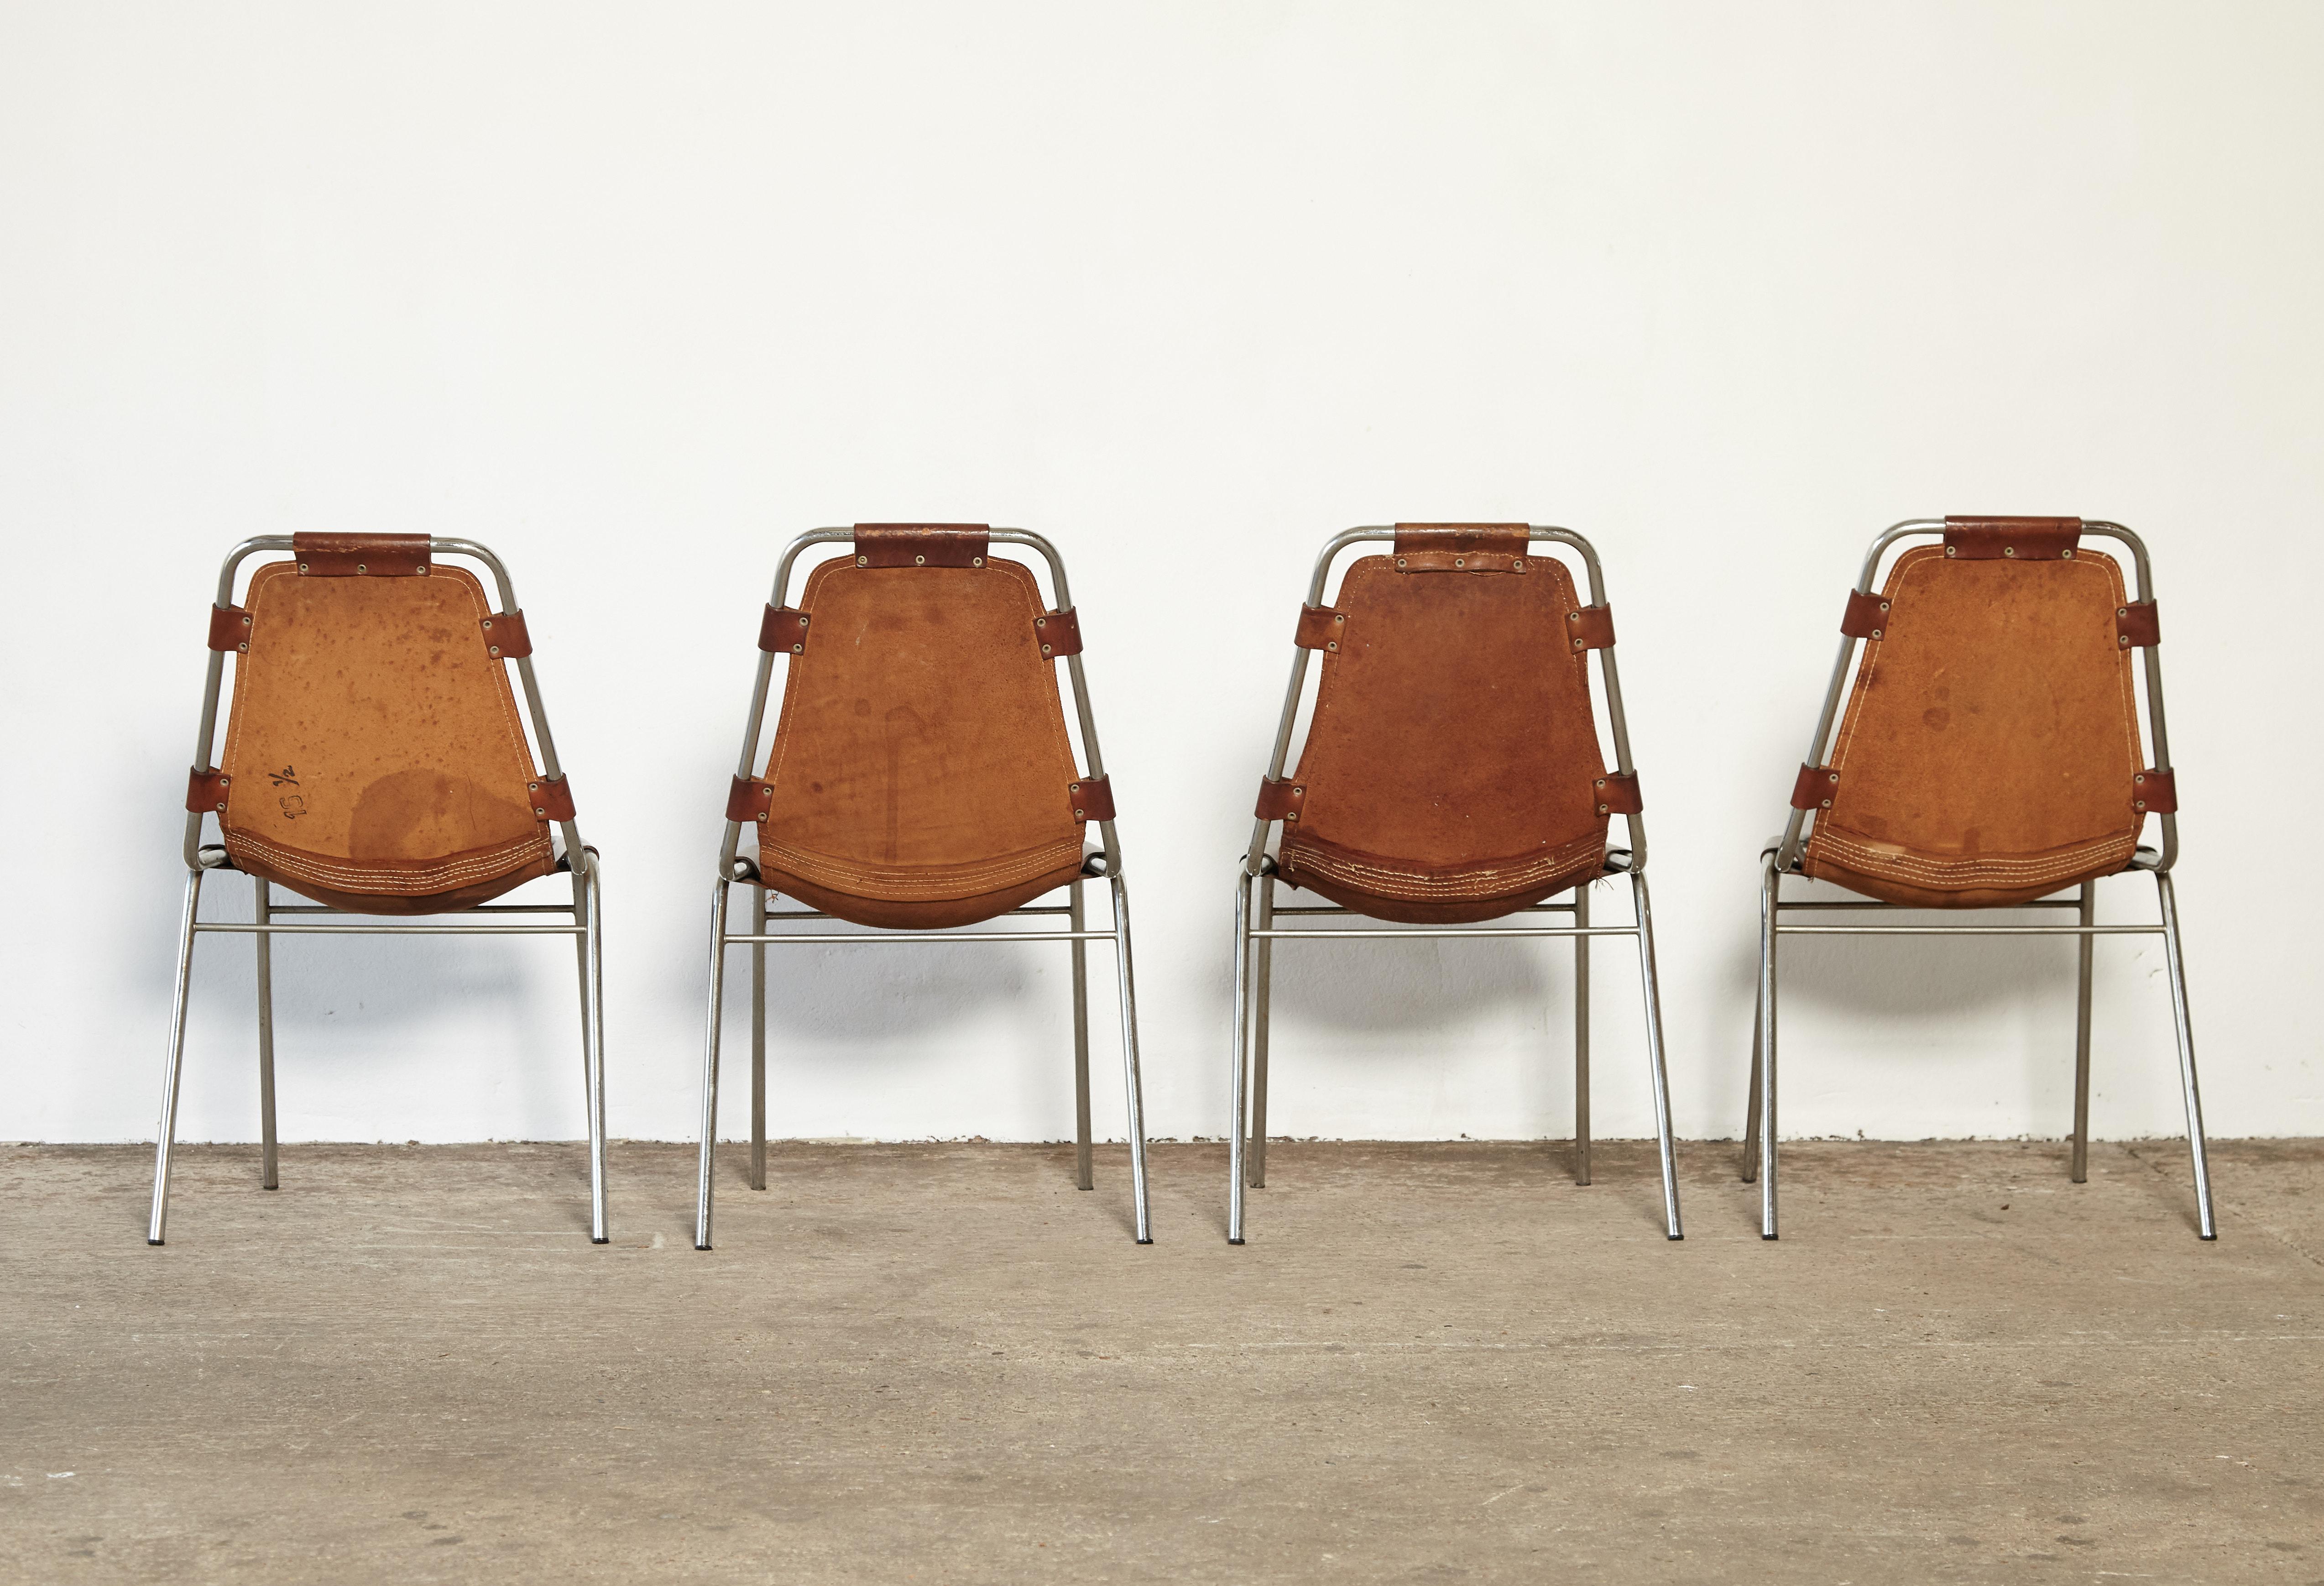 Steel Set of 4 'Les Arcs' Chairs Selected by Charlotte Perriand, 1970s